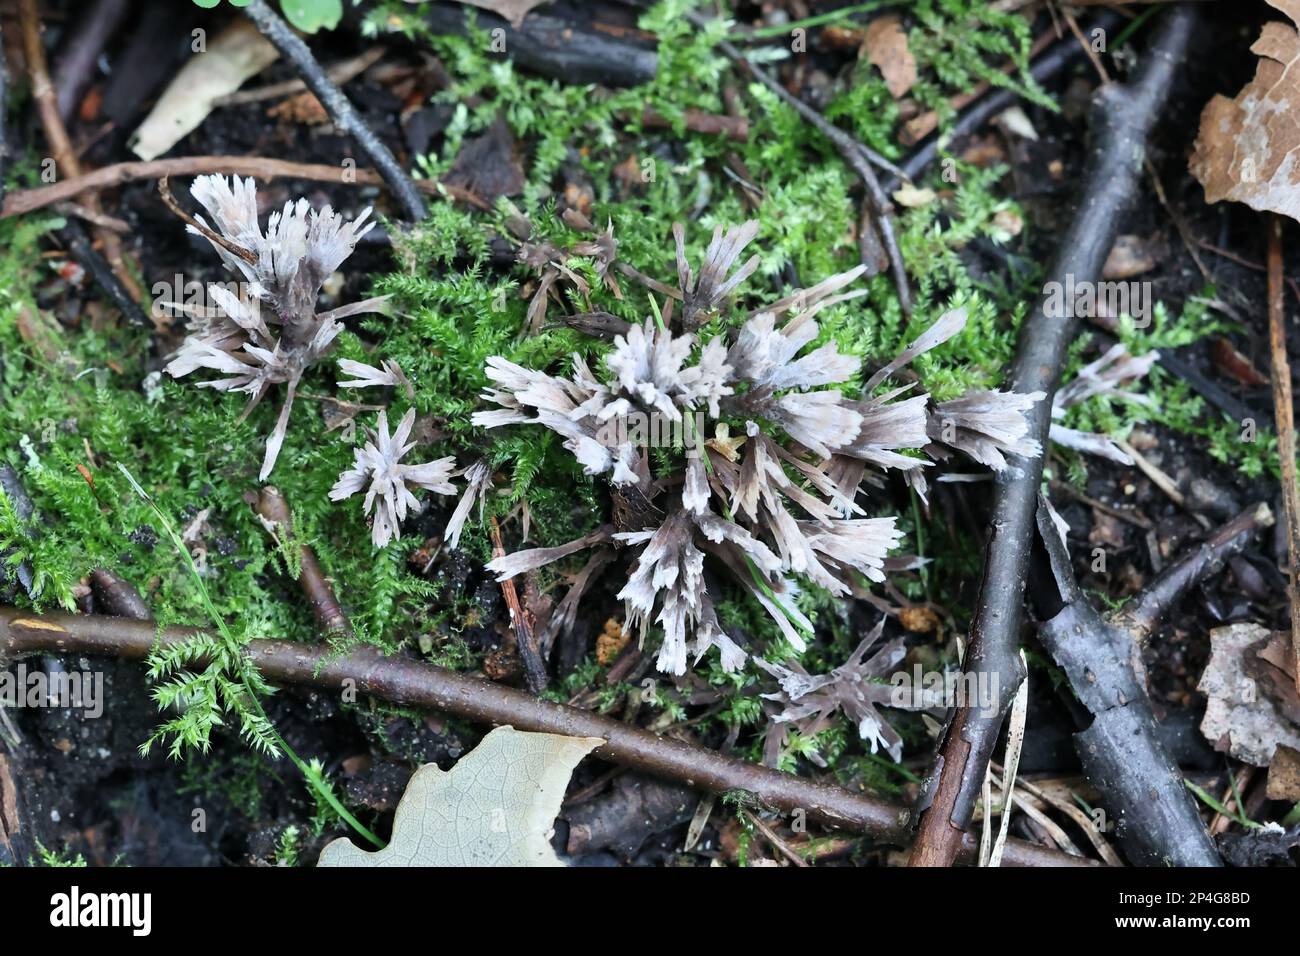 Thelephora anthocephala, commonly known as eartfan or fiber fan, wild fungus from Finland Stock Photo